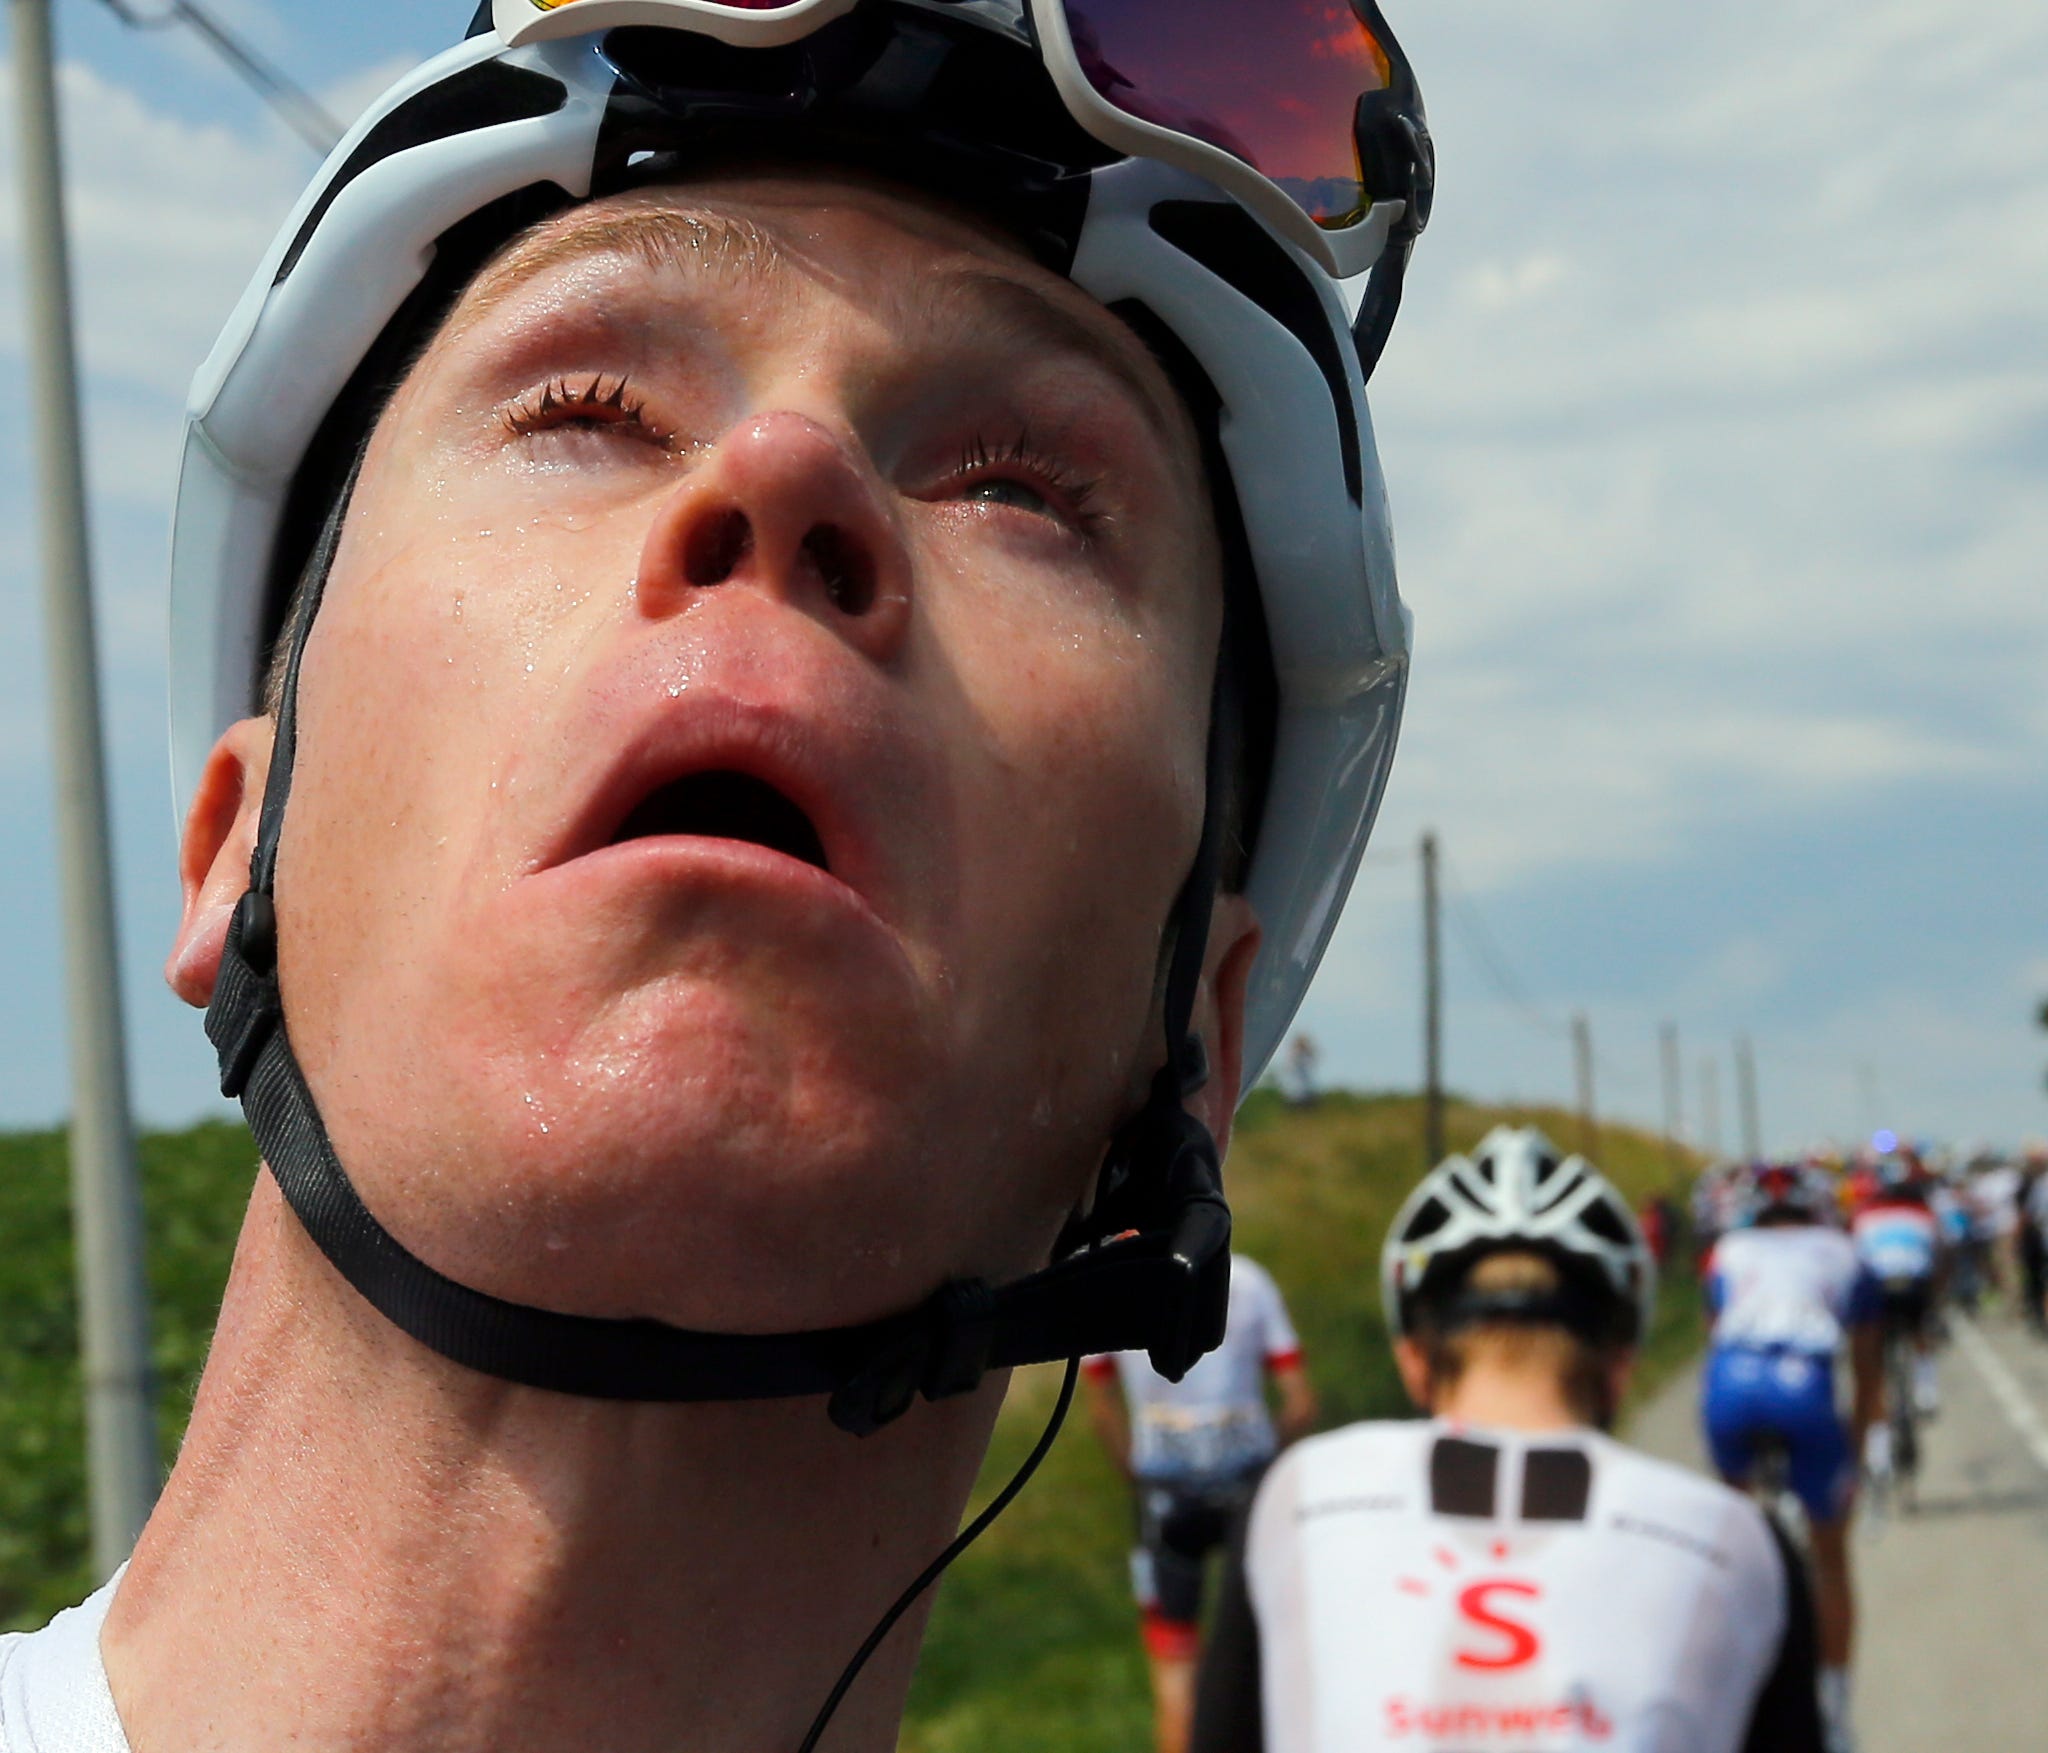 Britain's Chris Froome grimaces after he treated his eyes for tear gas or pepper spray sprayed on the peloton when a farmer's protest interrupted during the sixteenth stage of the Tour de France cycling race over 218 kilometers (135.5 miles) with sta